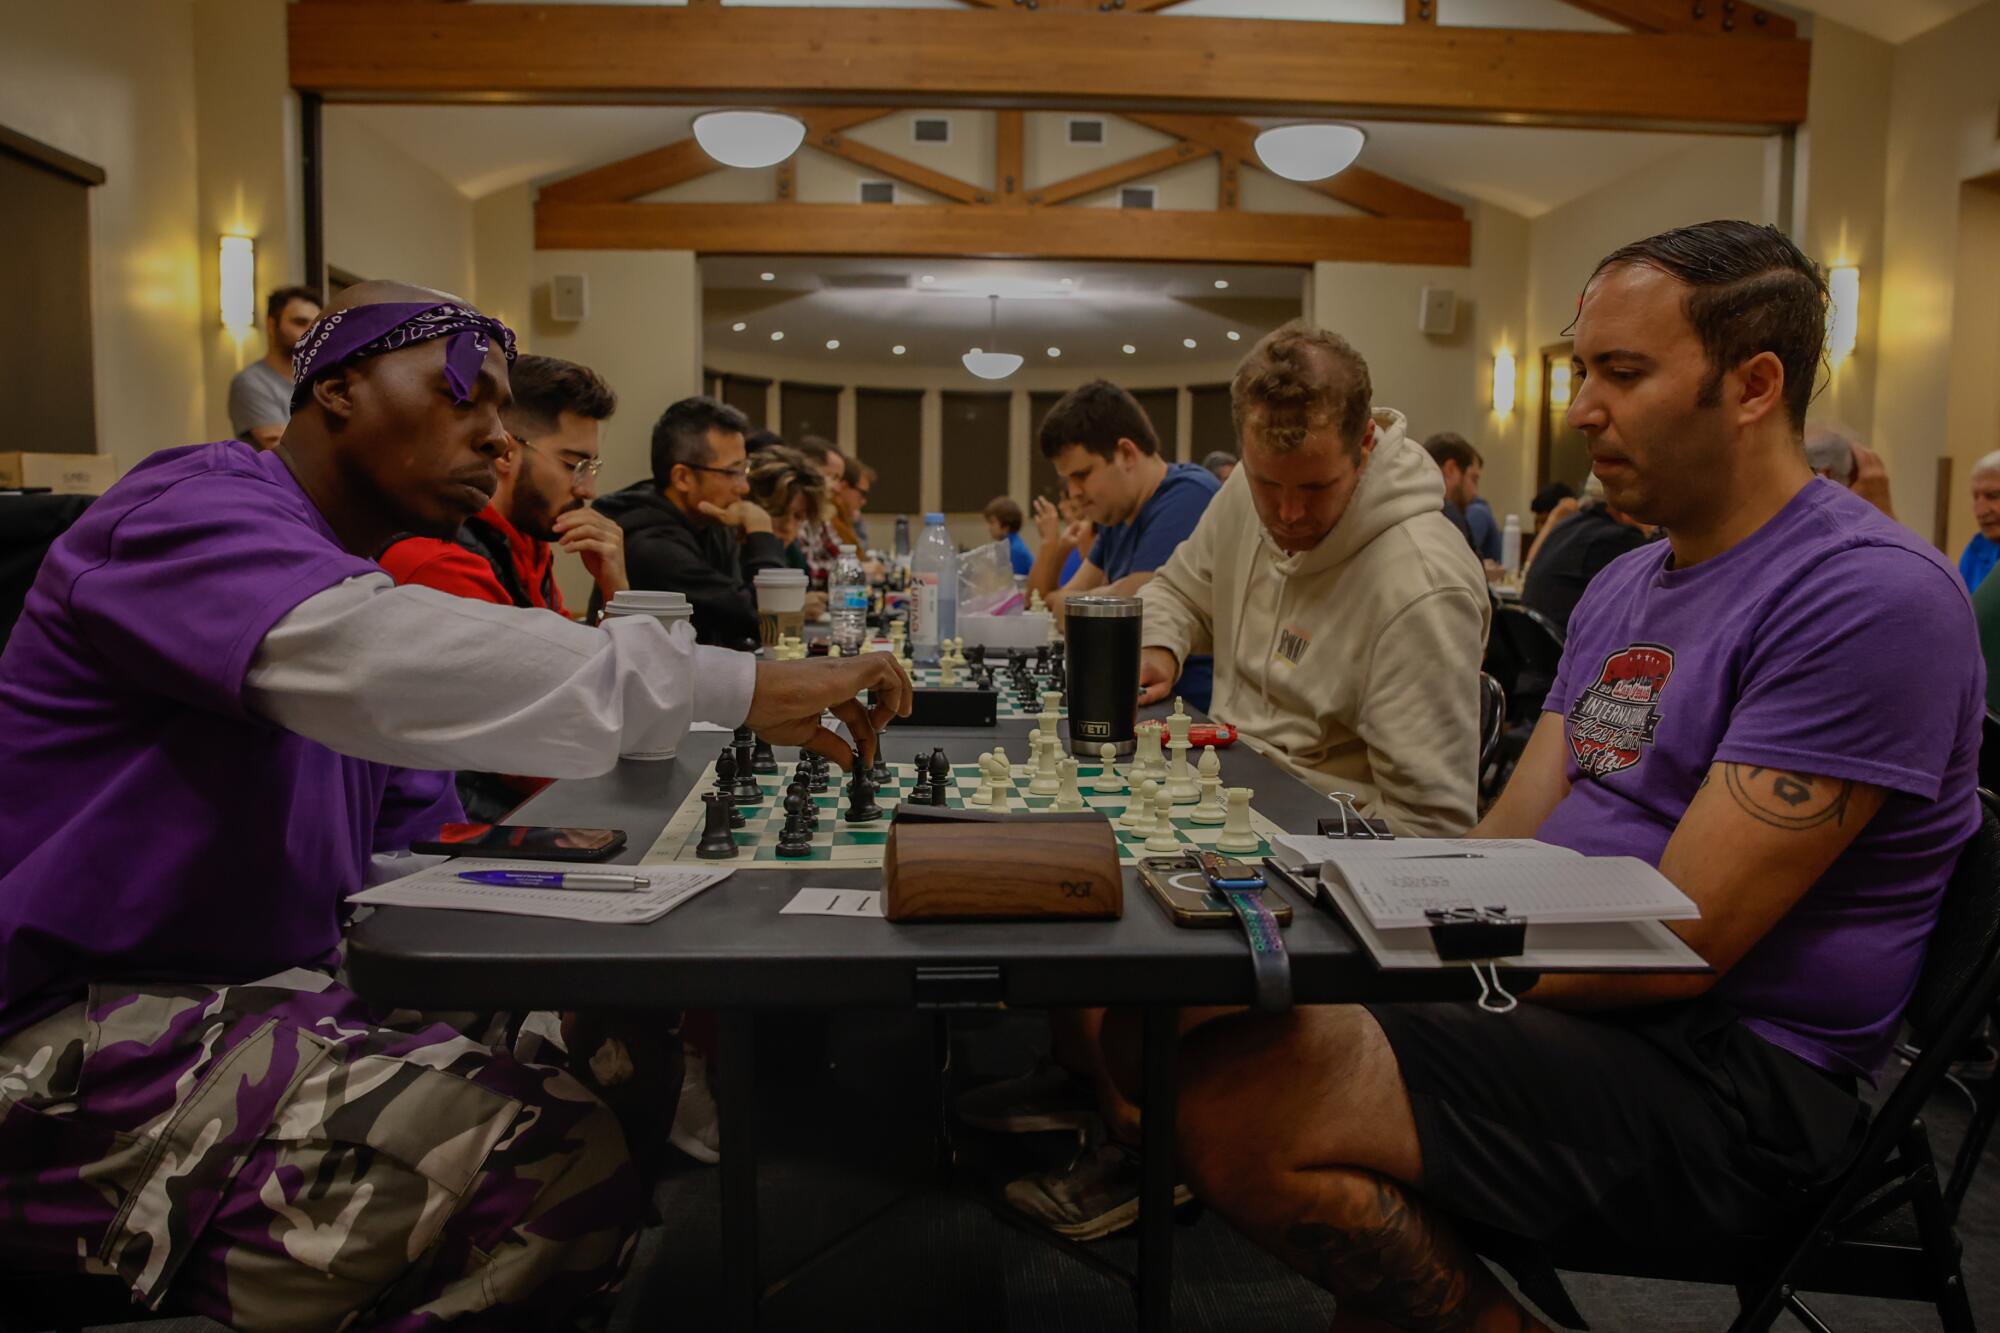 Vincent Hubbard, dressed in purple, plays chess with another man in purple at a long table of chess players at a tournament.